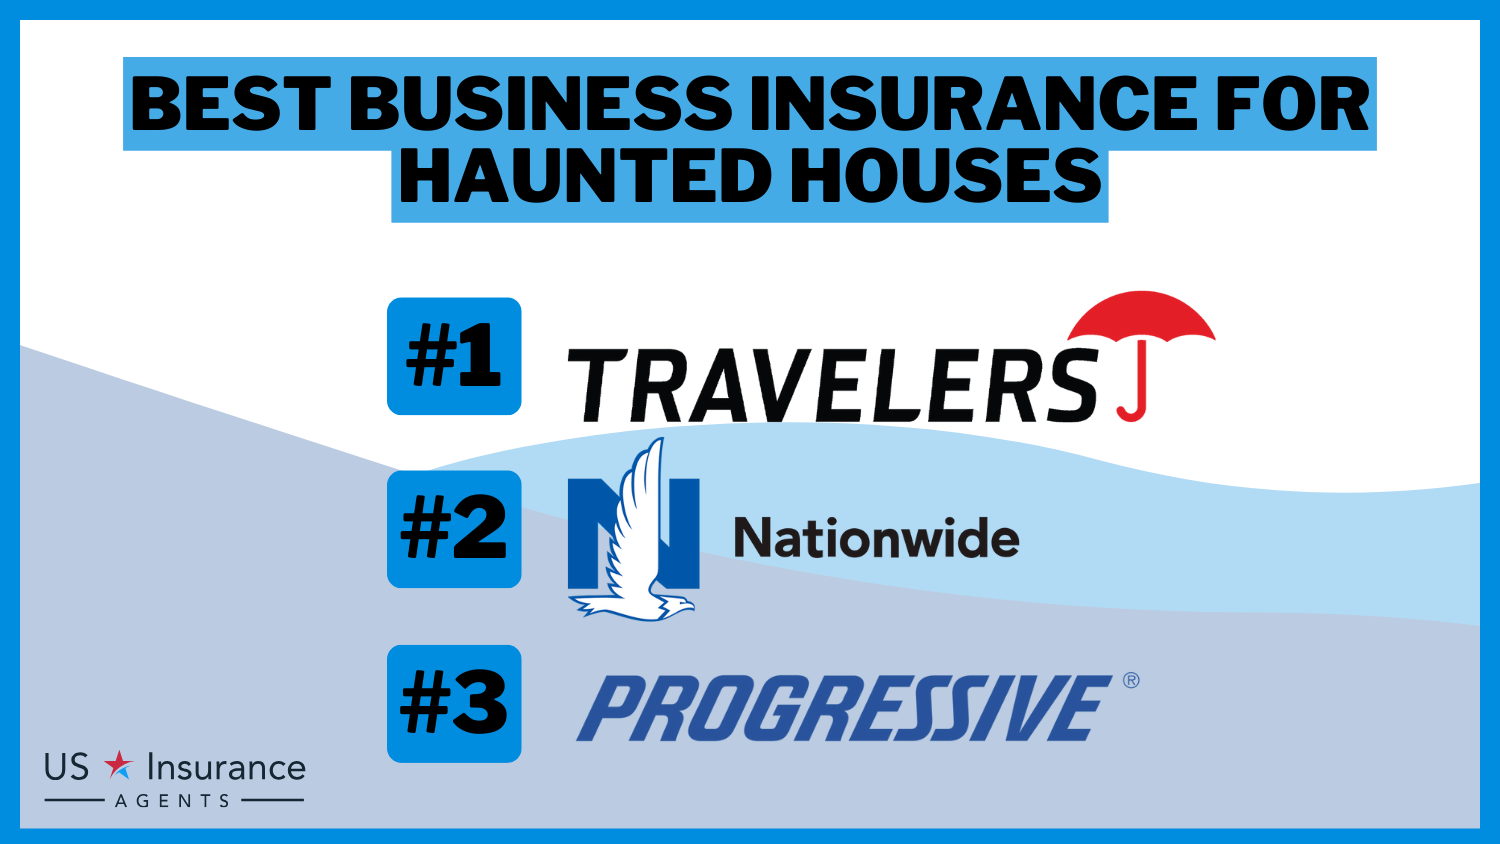 3 Best Business Insurance for Haunted Houses: Travelers, Nationwide and Progressive.